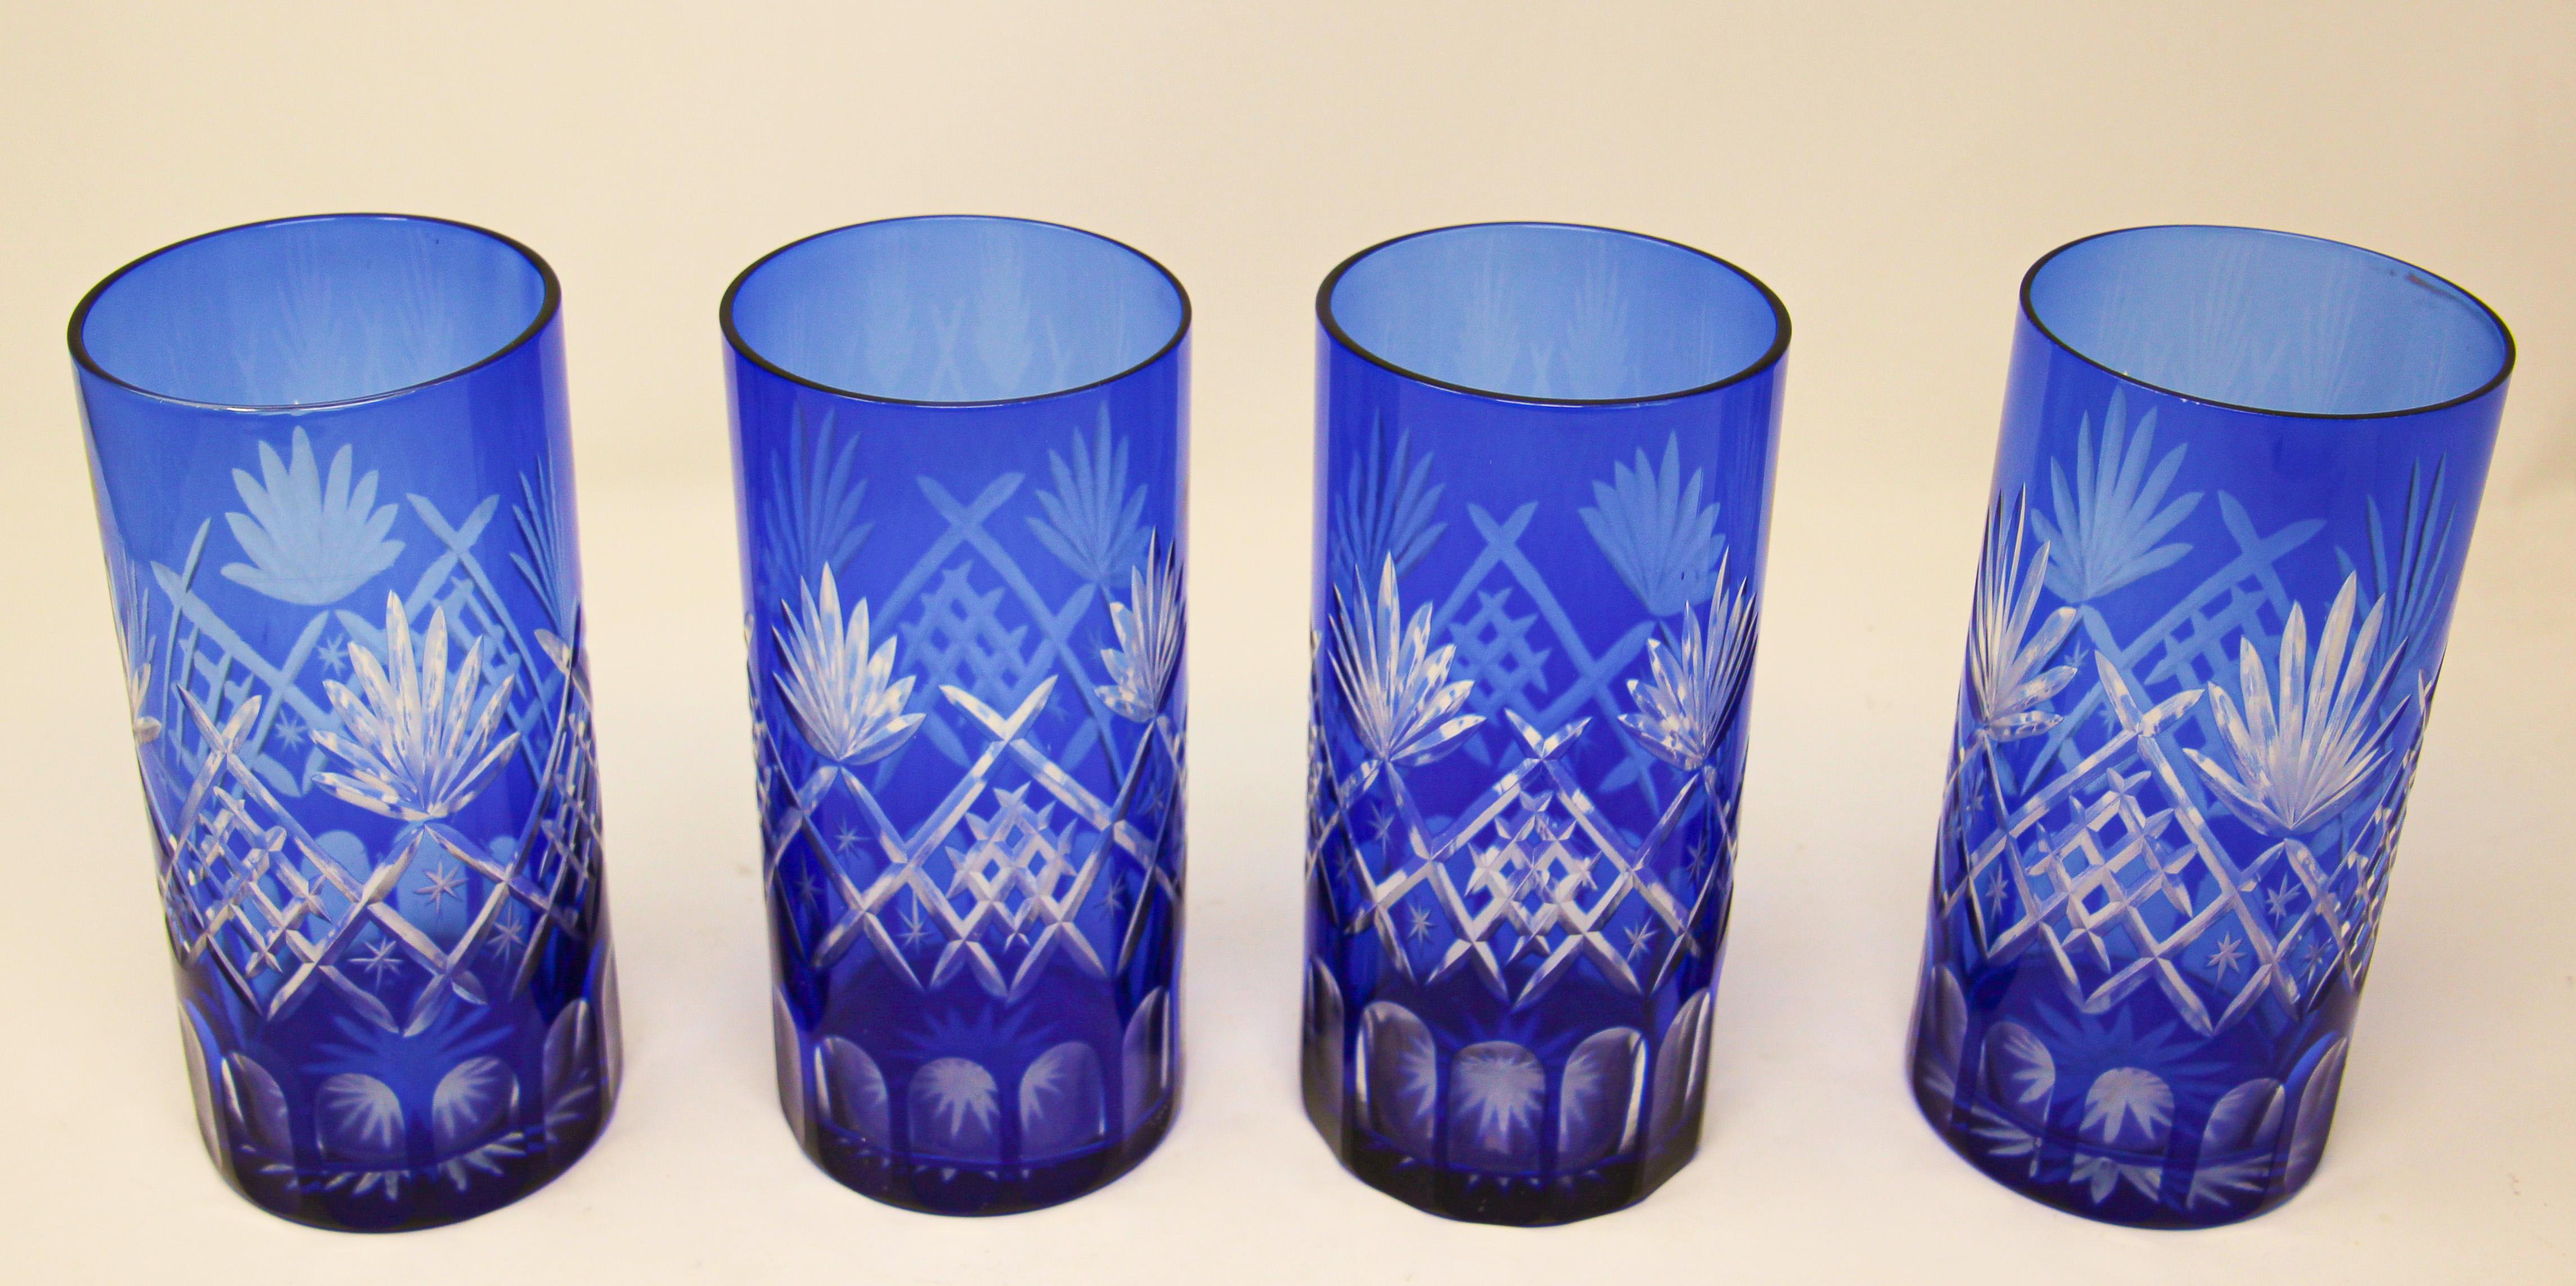 Set of four highball cobalt blue crystal glasses.
Exquisite Bohemian crystal style cut Czech drinking rock glasses tumbler set of four.
The vibrant hand blown rich sapphire blue jewel sapphire blue crystal glass is cut to clear to reveal a lovely